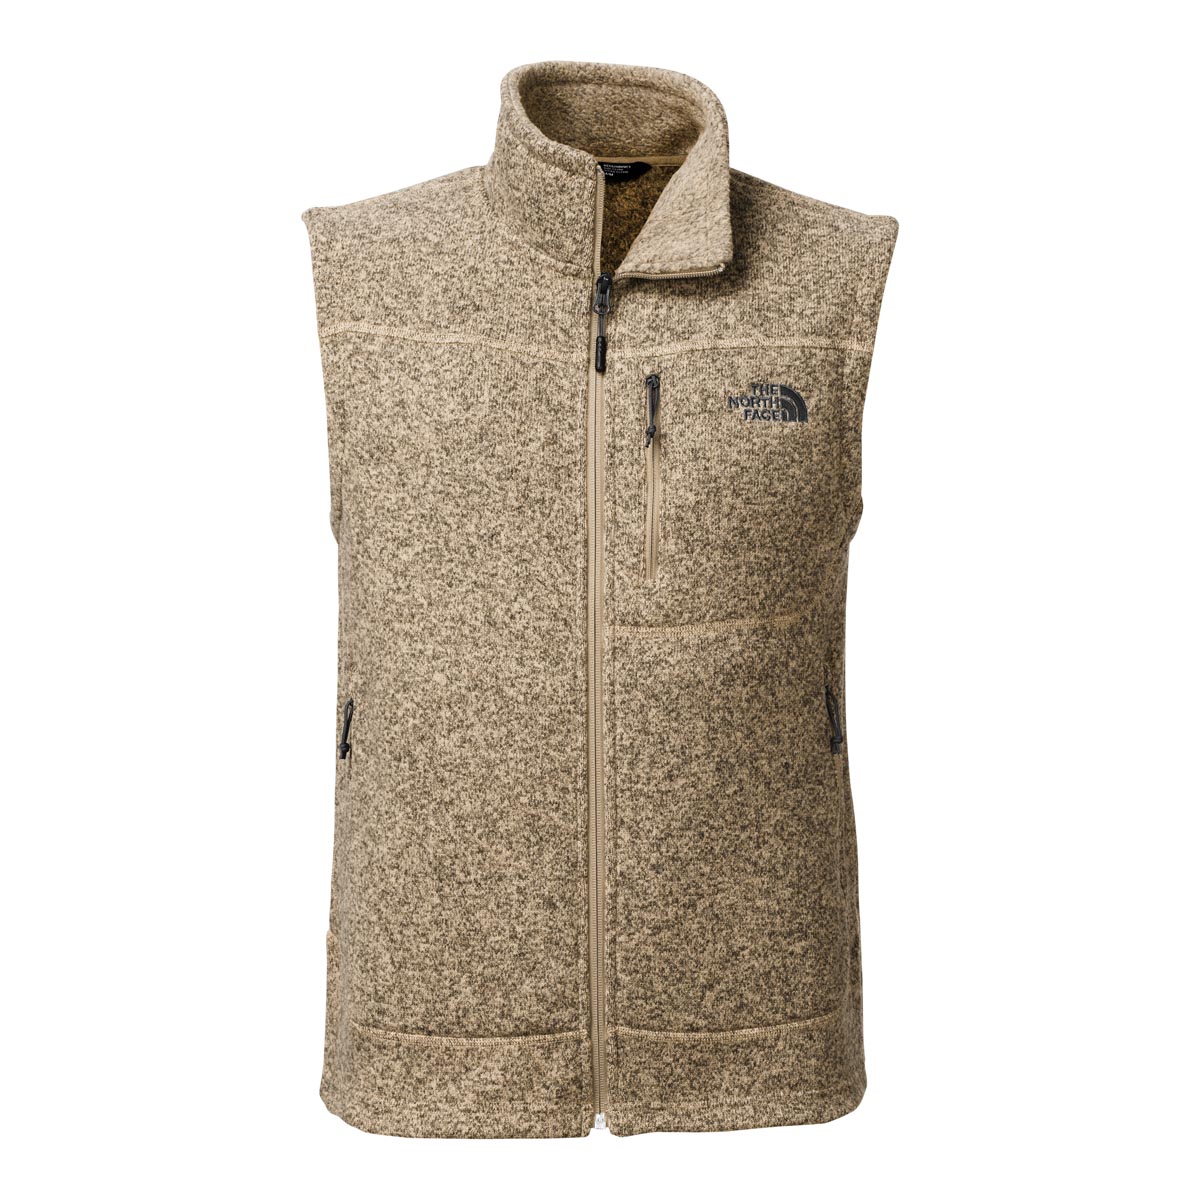 The North Face Men's Gordon Lyons Vest Discontinued Pricing